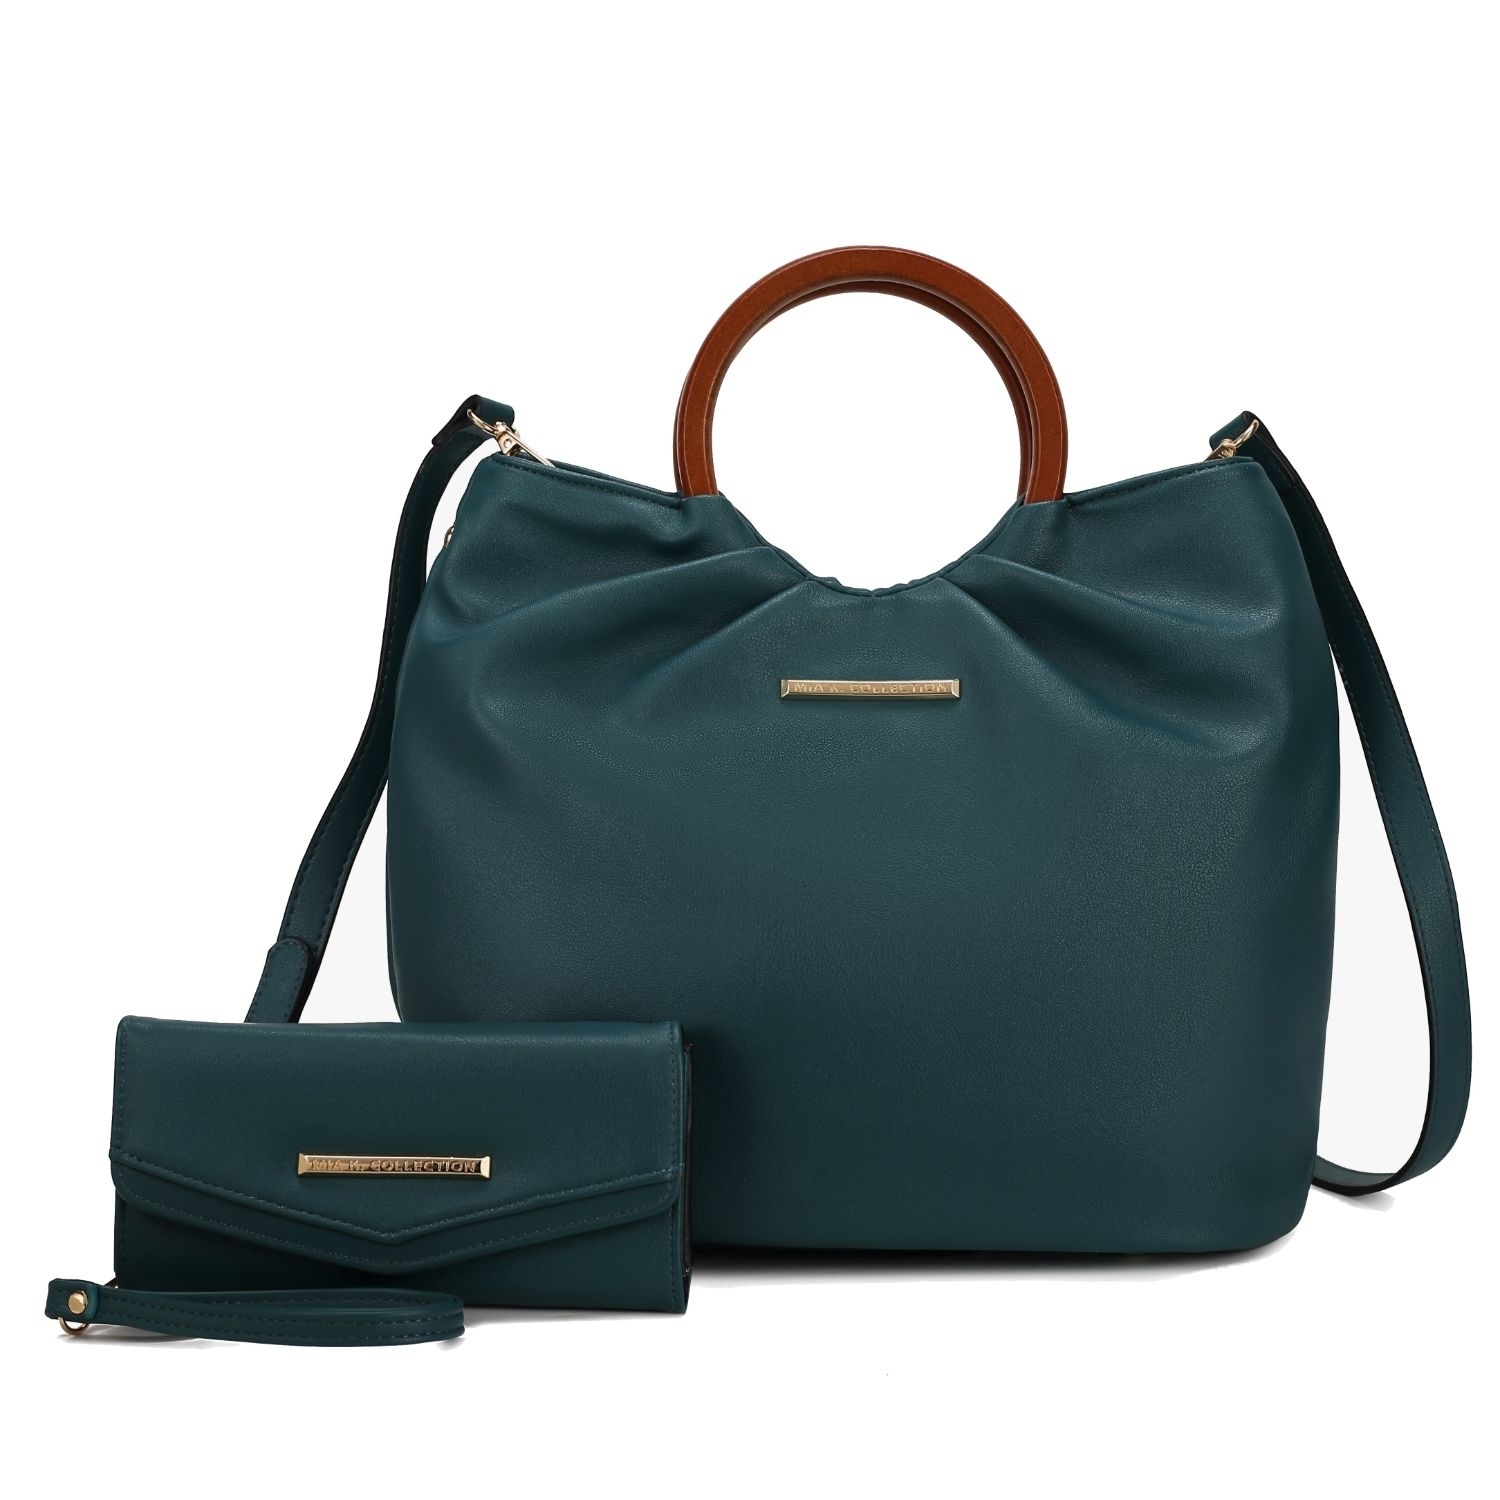 MKF Collection Leilani Vegan Leather Tote Bag With Wallet By Mia K - 2 Pieces - Teal